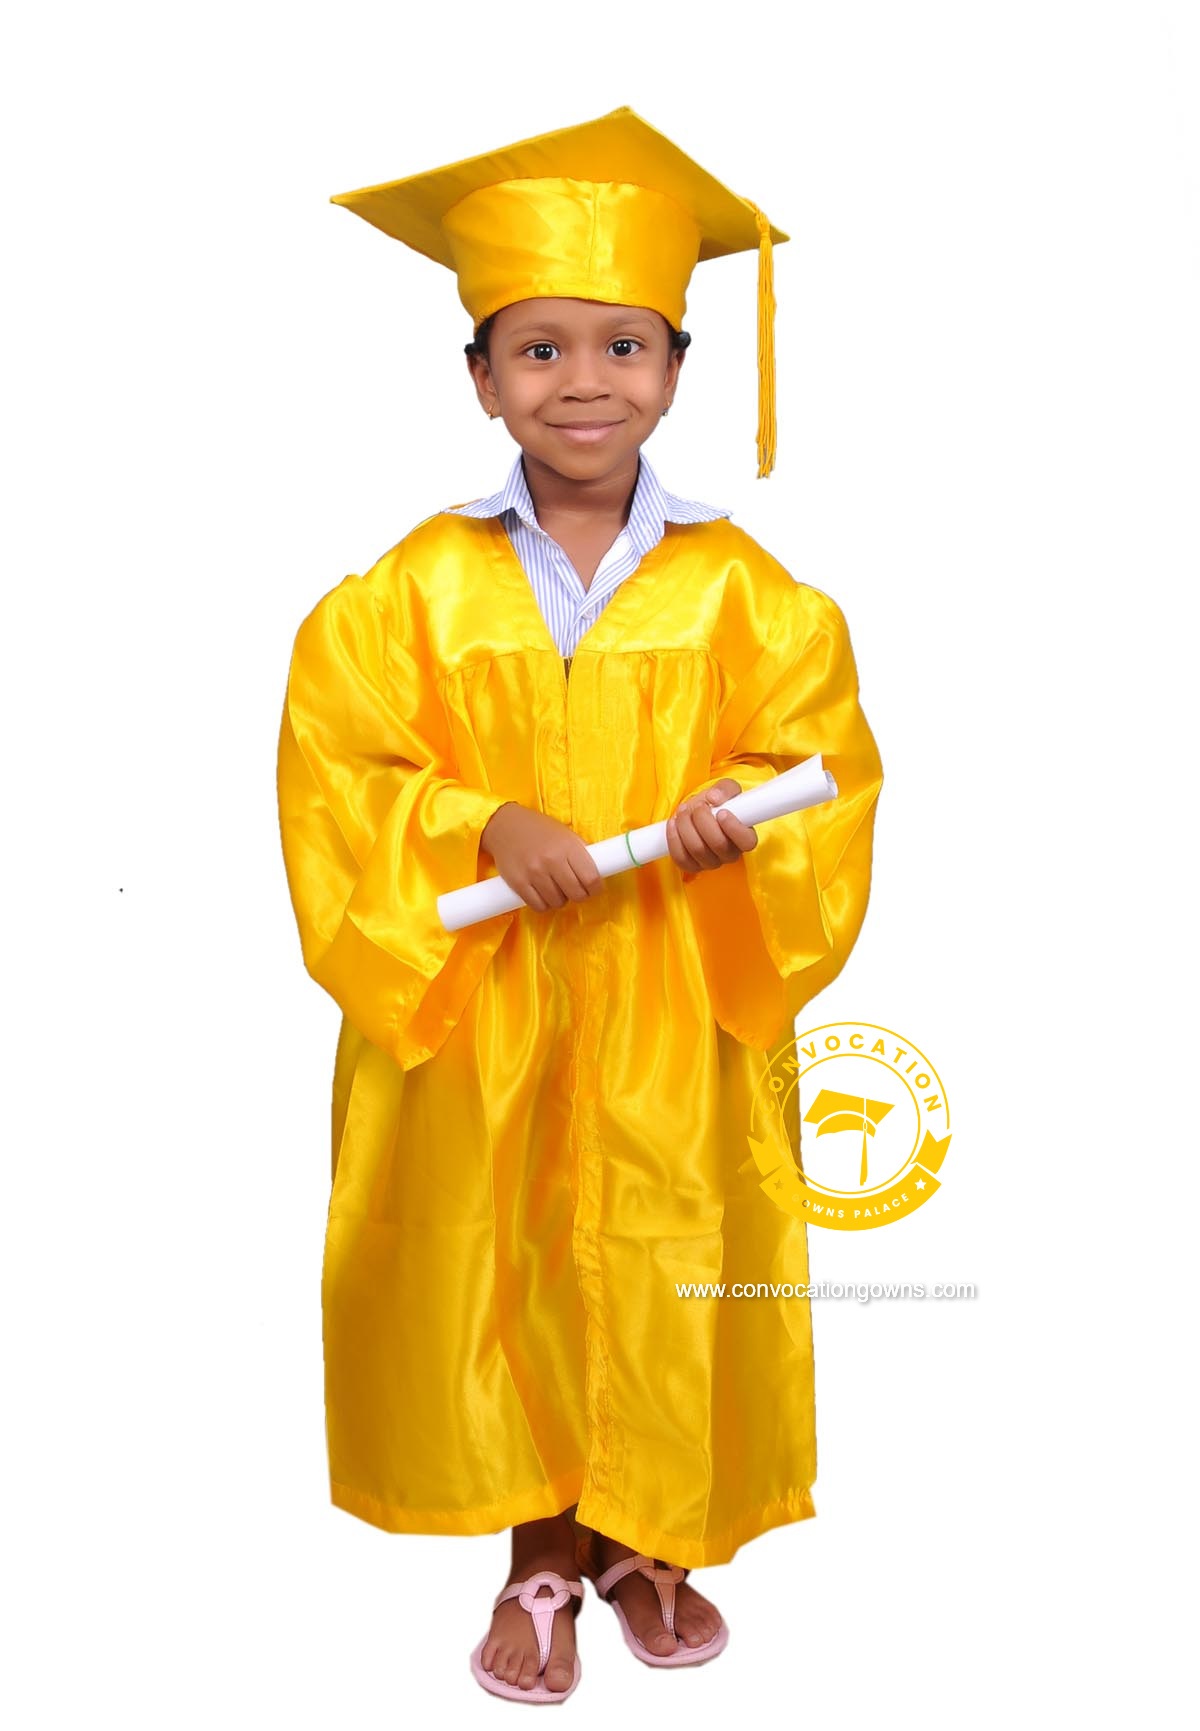 Kindergarten Convocation Gown - Convocation Gowns Palace